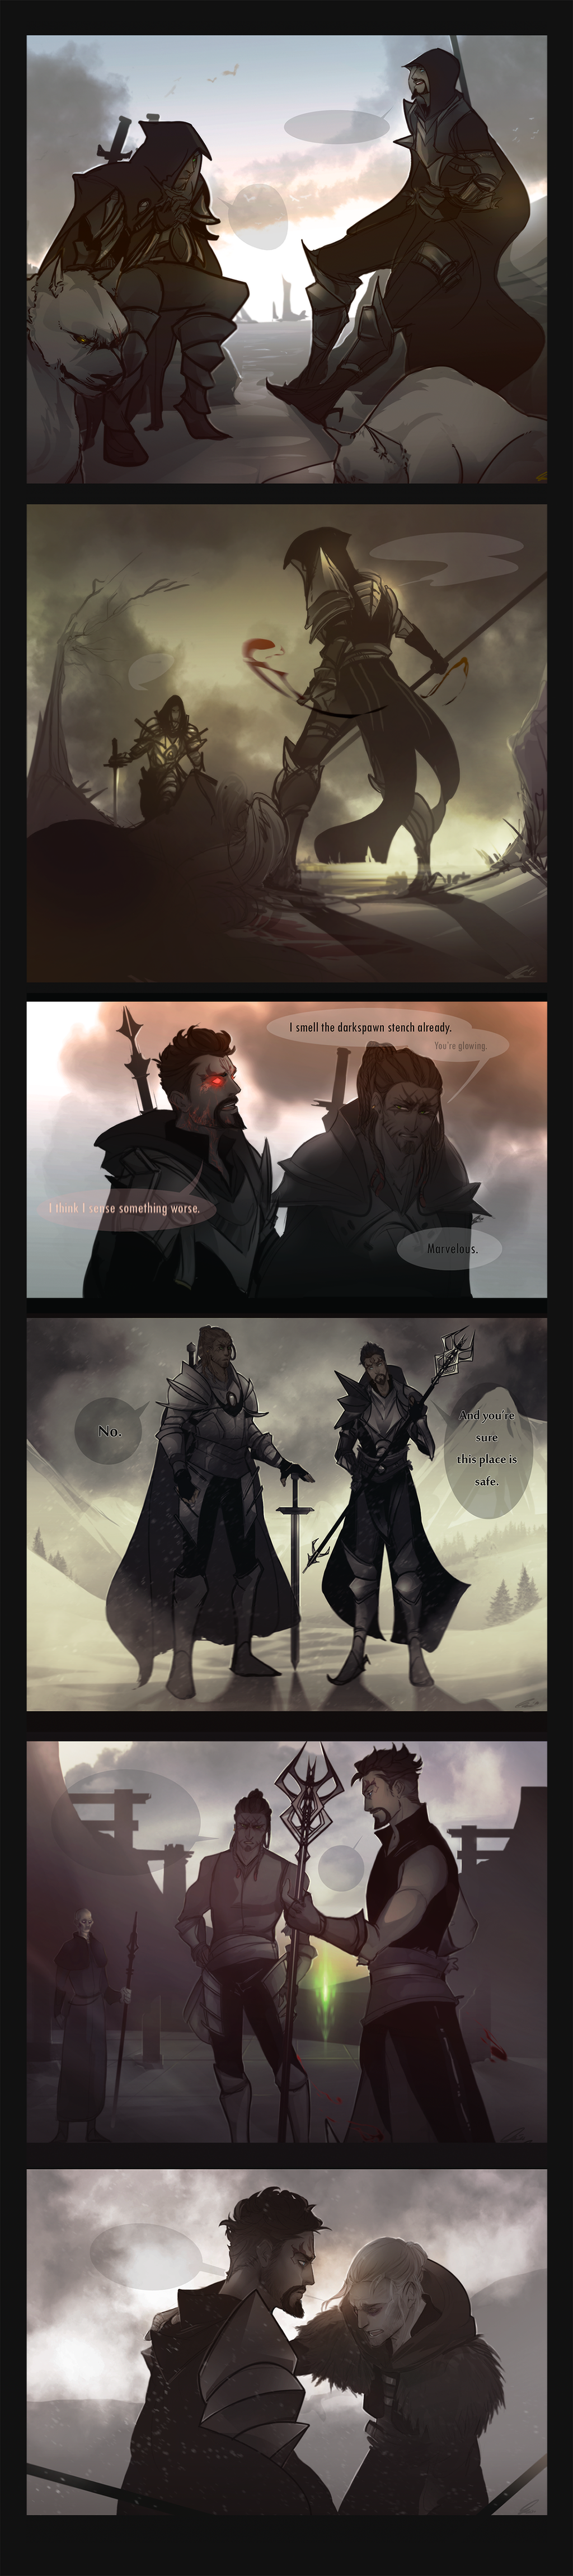 meanwhile_in_thedas_somewhere_by_audelade-d7r6l1e.png